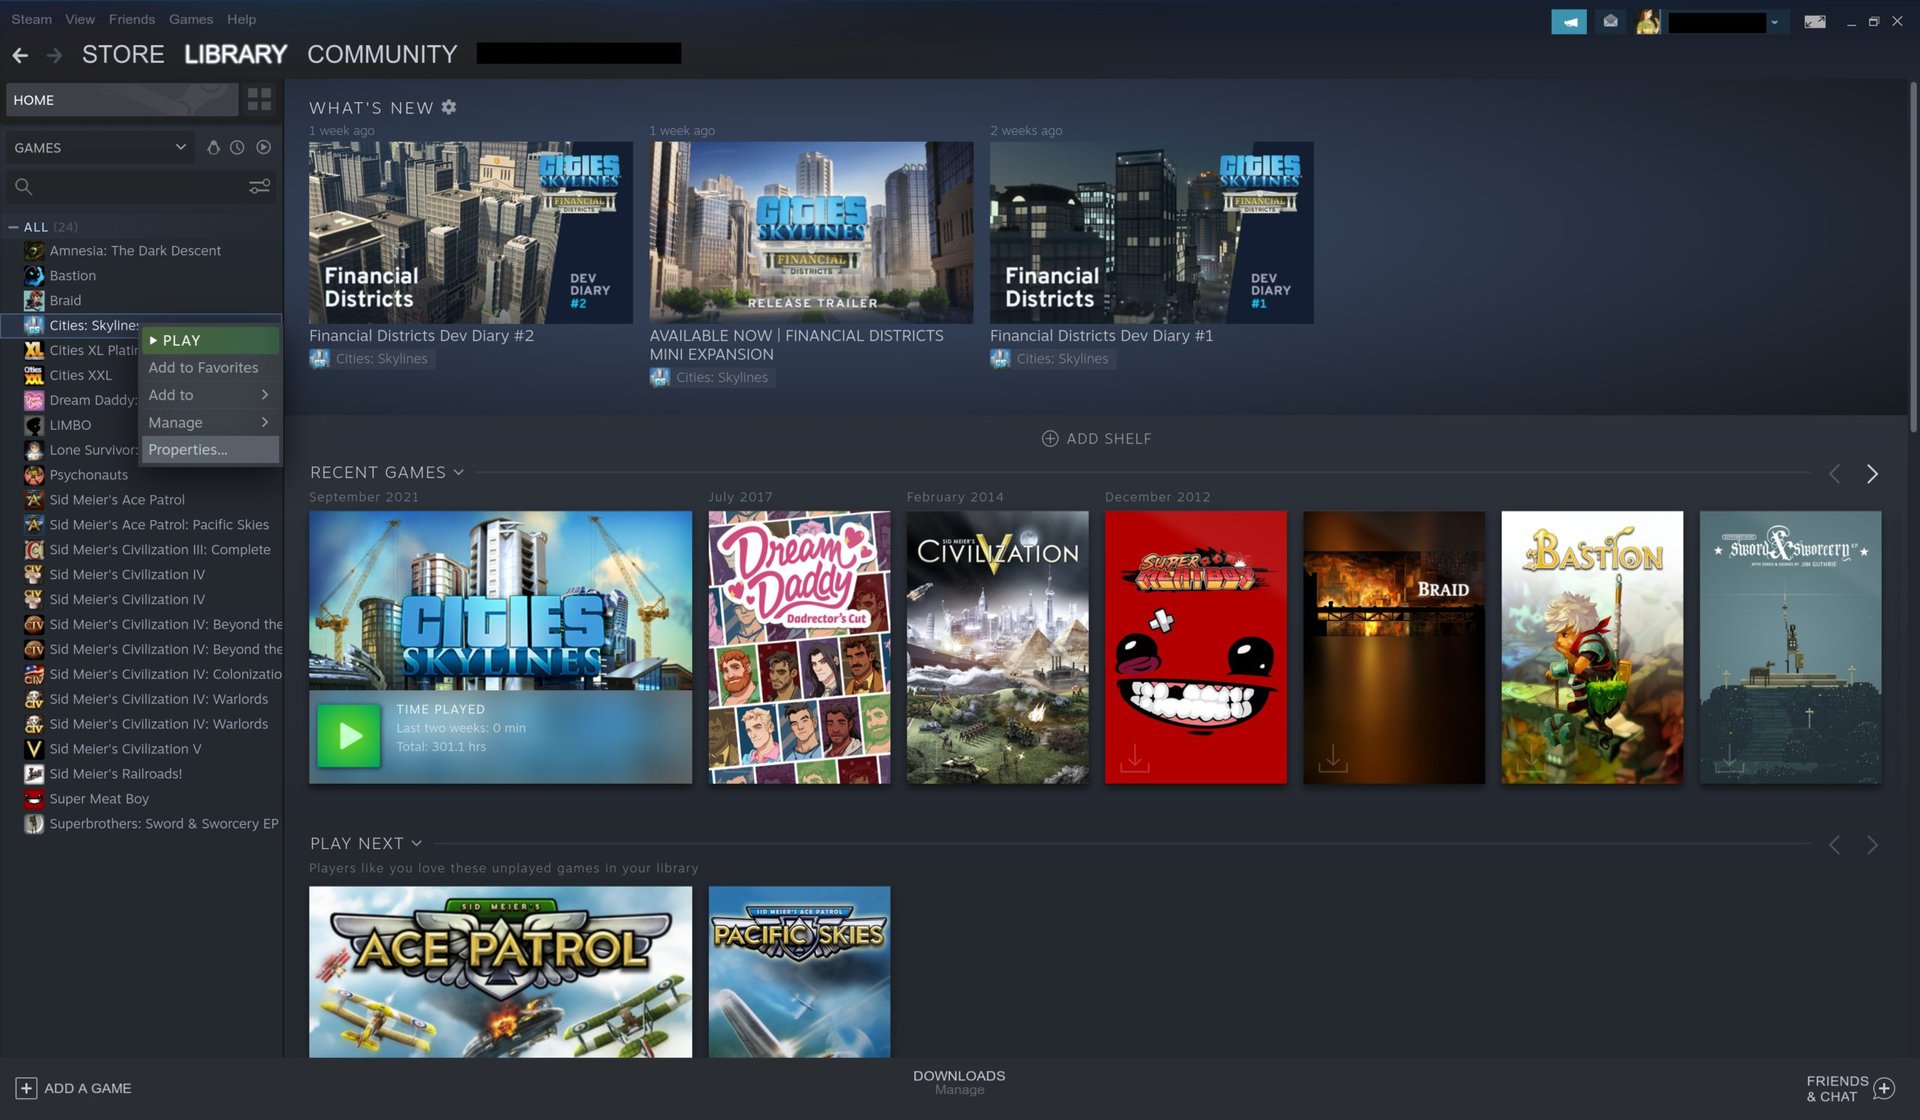 A screenshot of the Steam settings window showing the right click menu visible on a game in the Library with "Properties" highlighted.